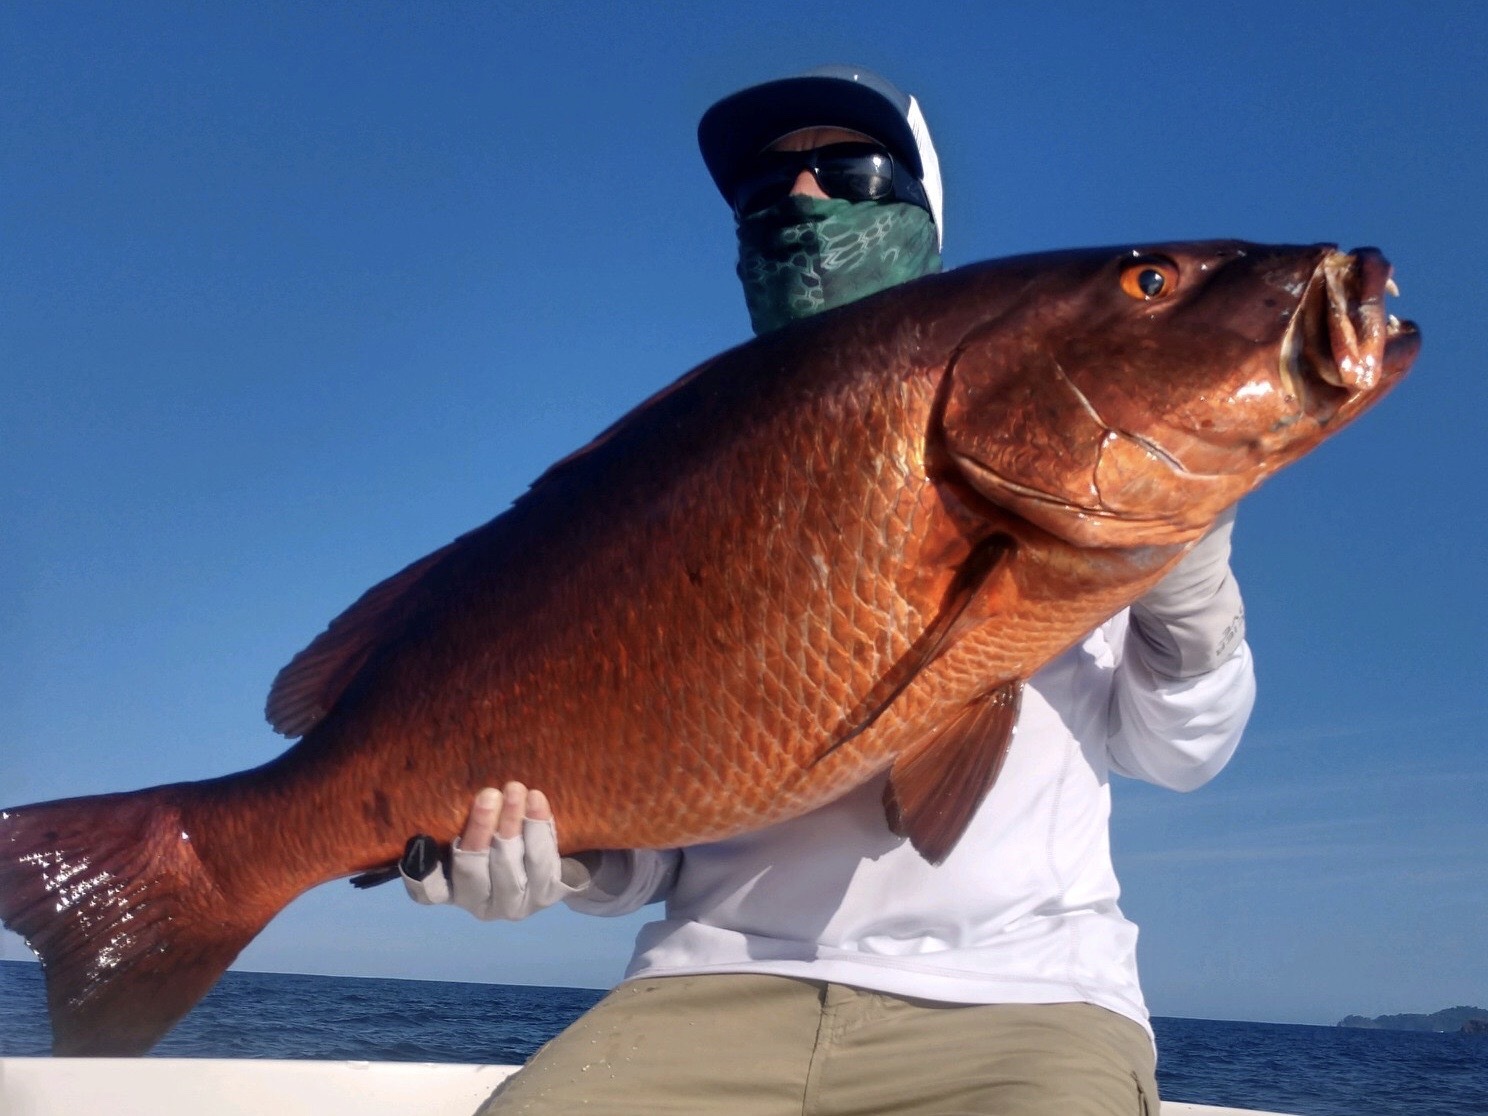 Dean Foster decked this big cubera snapper while fishing in Panama last week.